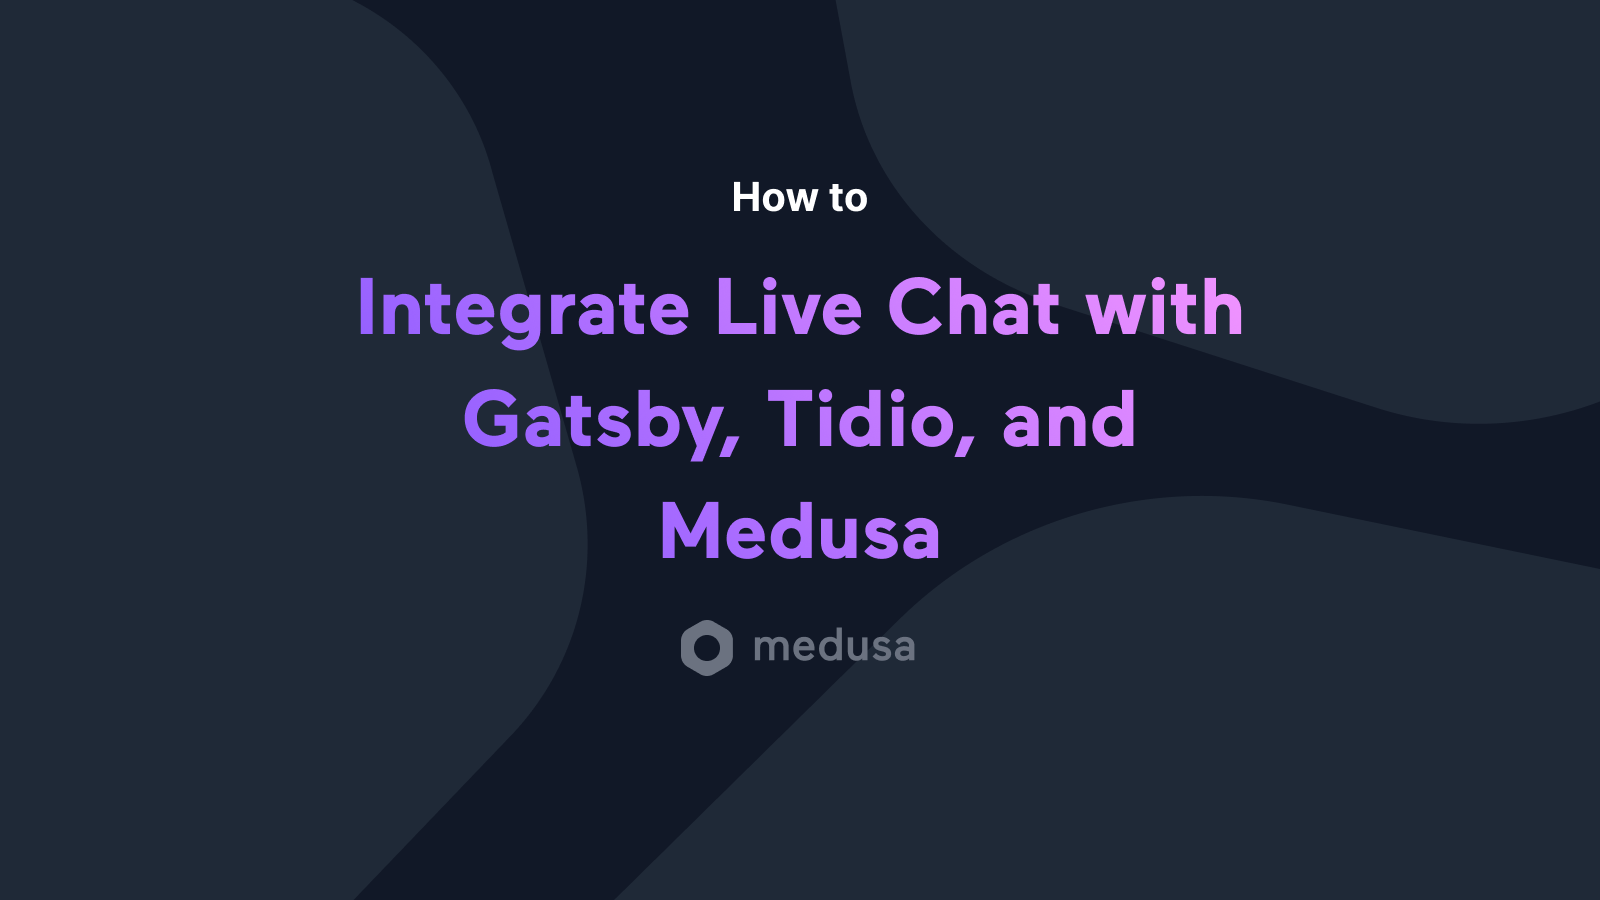 How to integrate Live Chat with Gatsby, Tidio, and Medusa